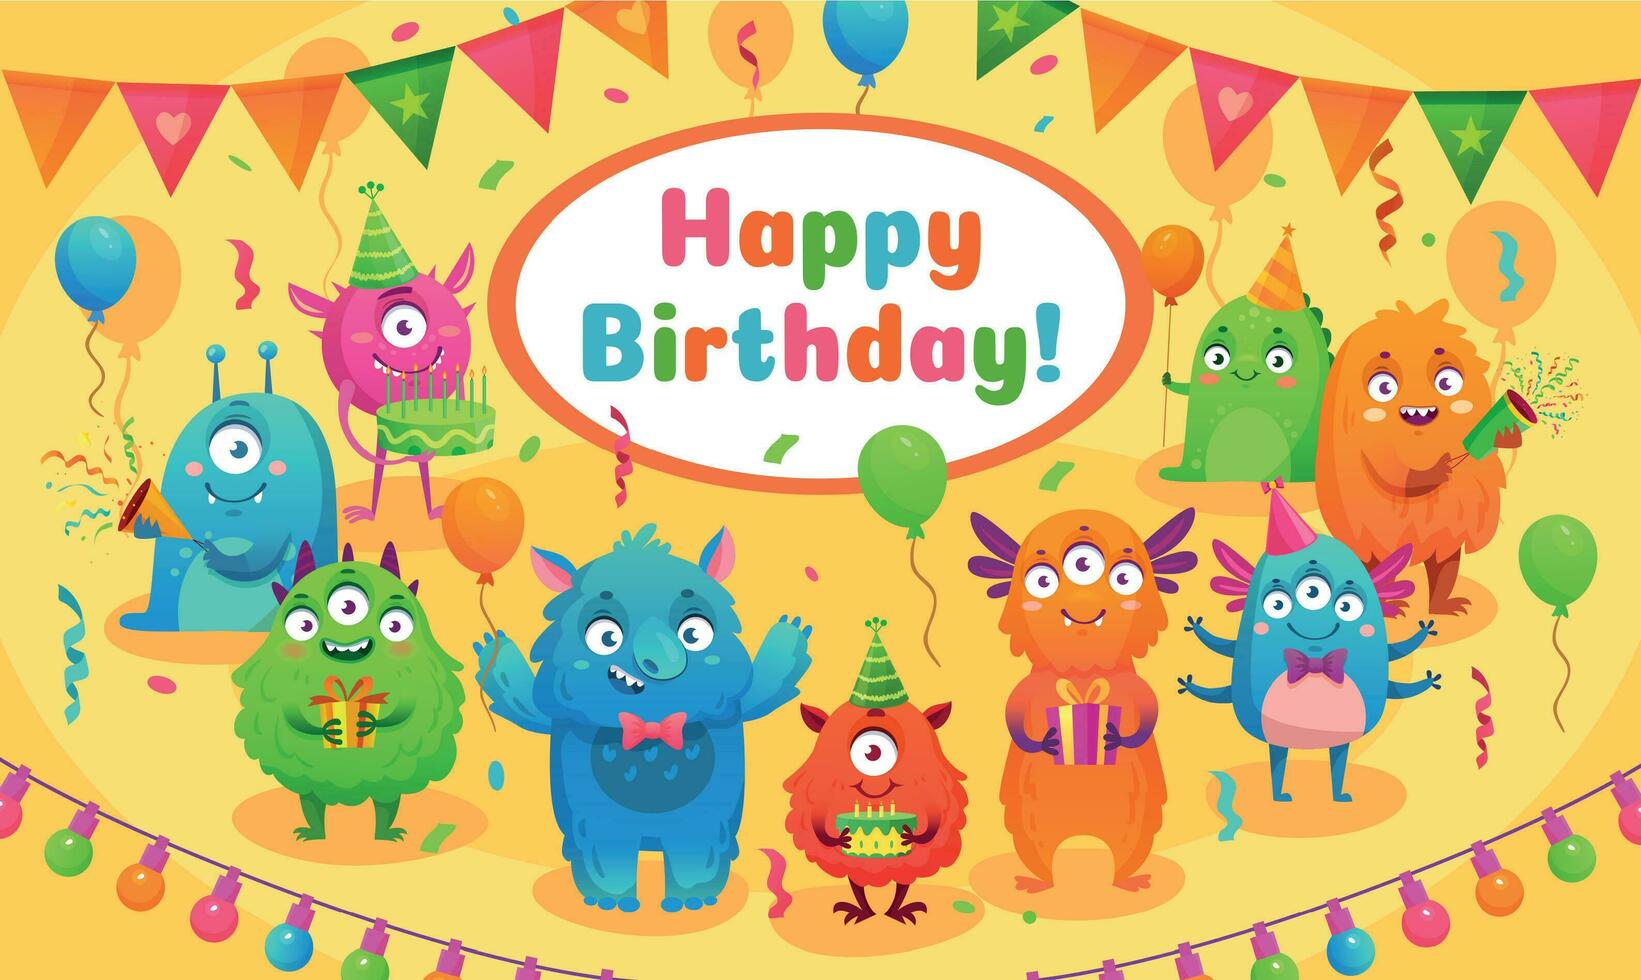 Happy birthday monsters. Kids birthday party cute monster mascot, monsters anniversary greeting card cartoon vector illustration